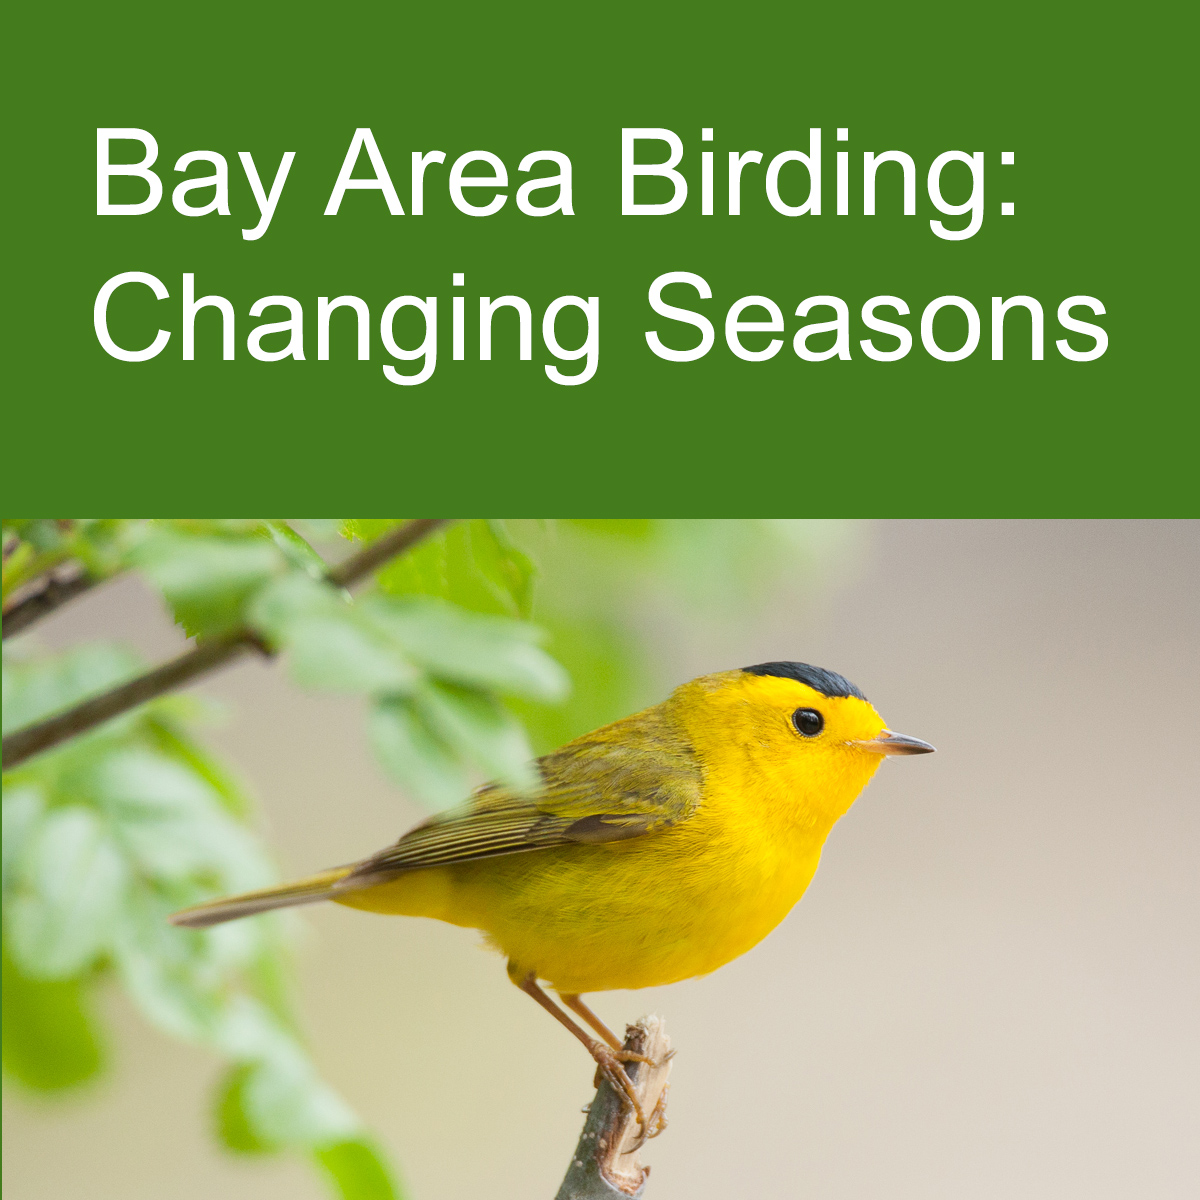 Bright yellow bird, a Wilson's warbler, on a branch. Caption: Bay Area Birding: Changing Seasons